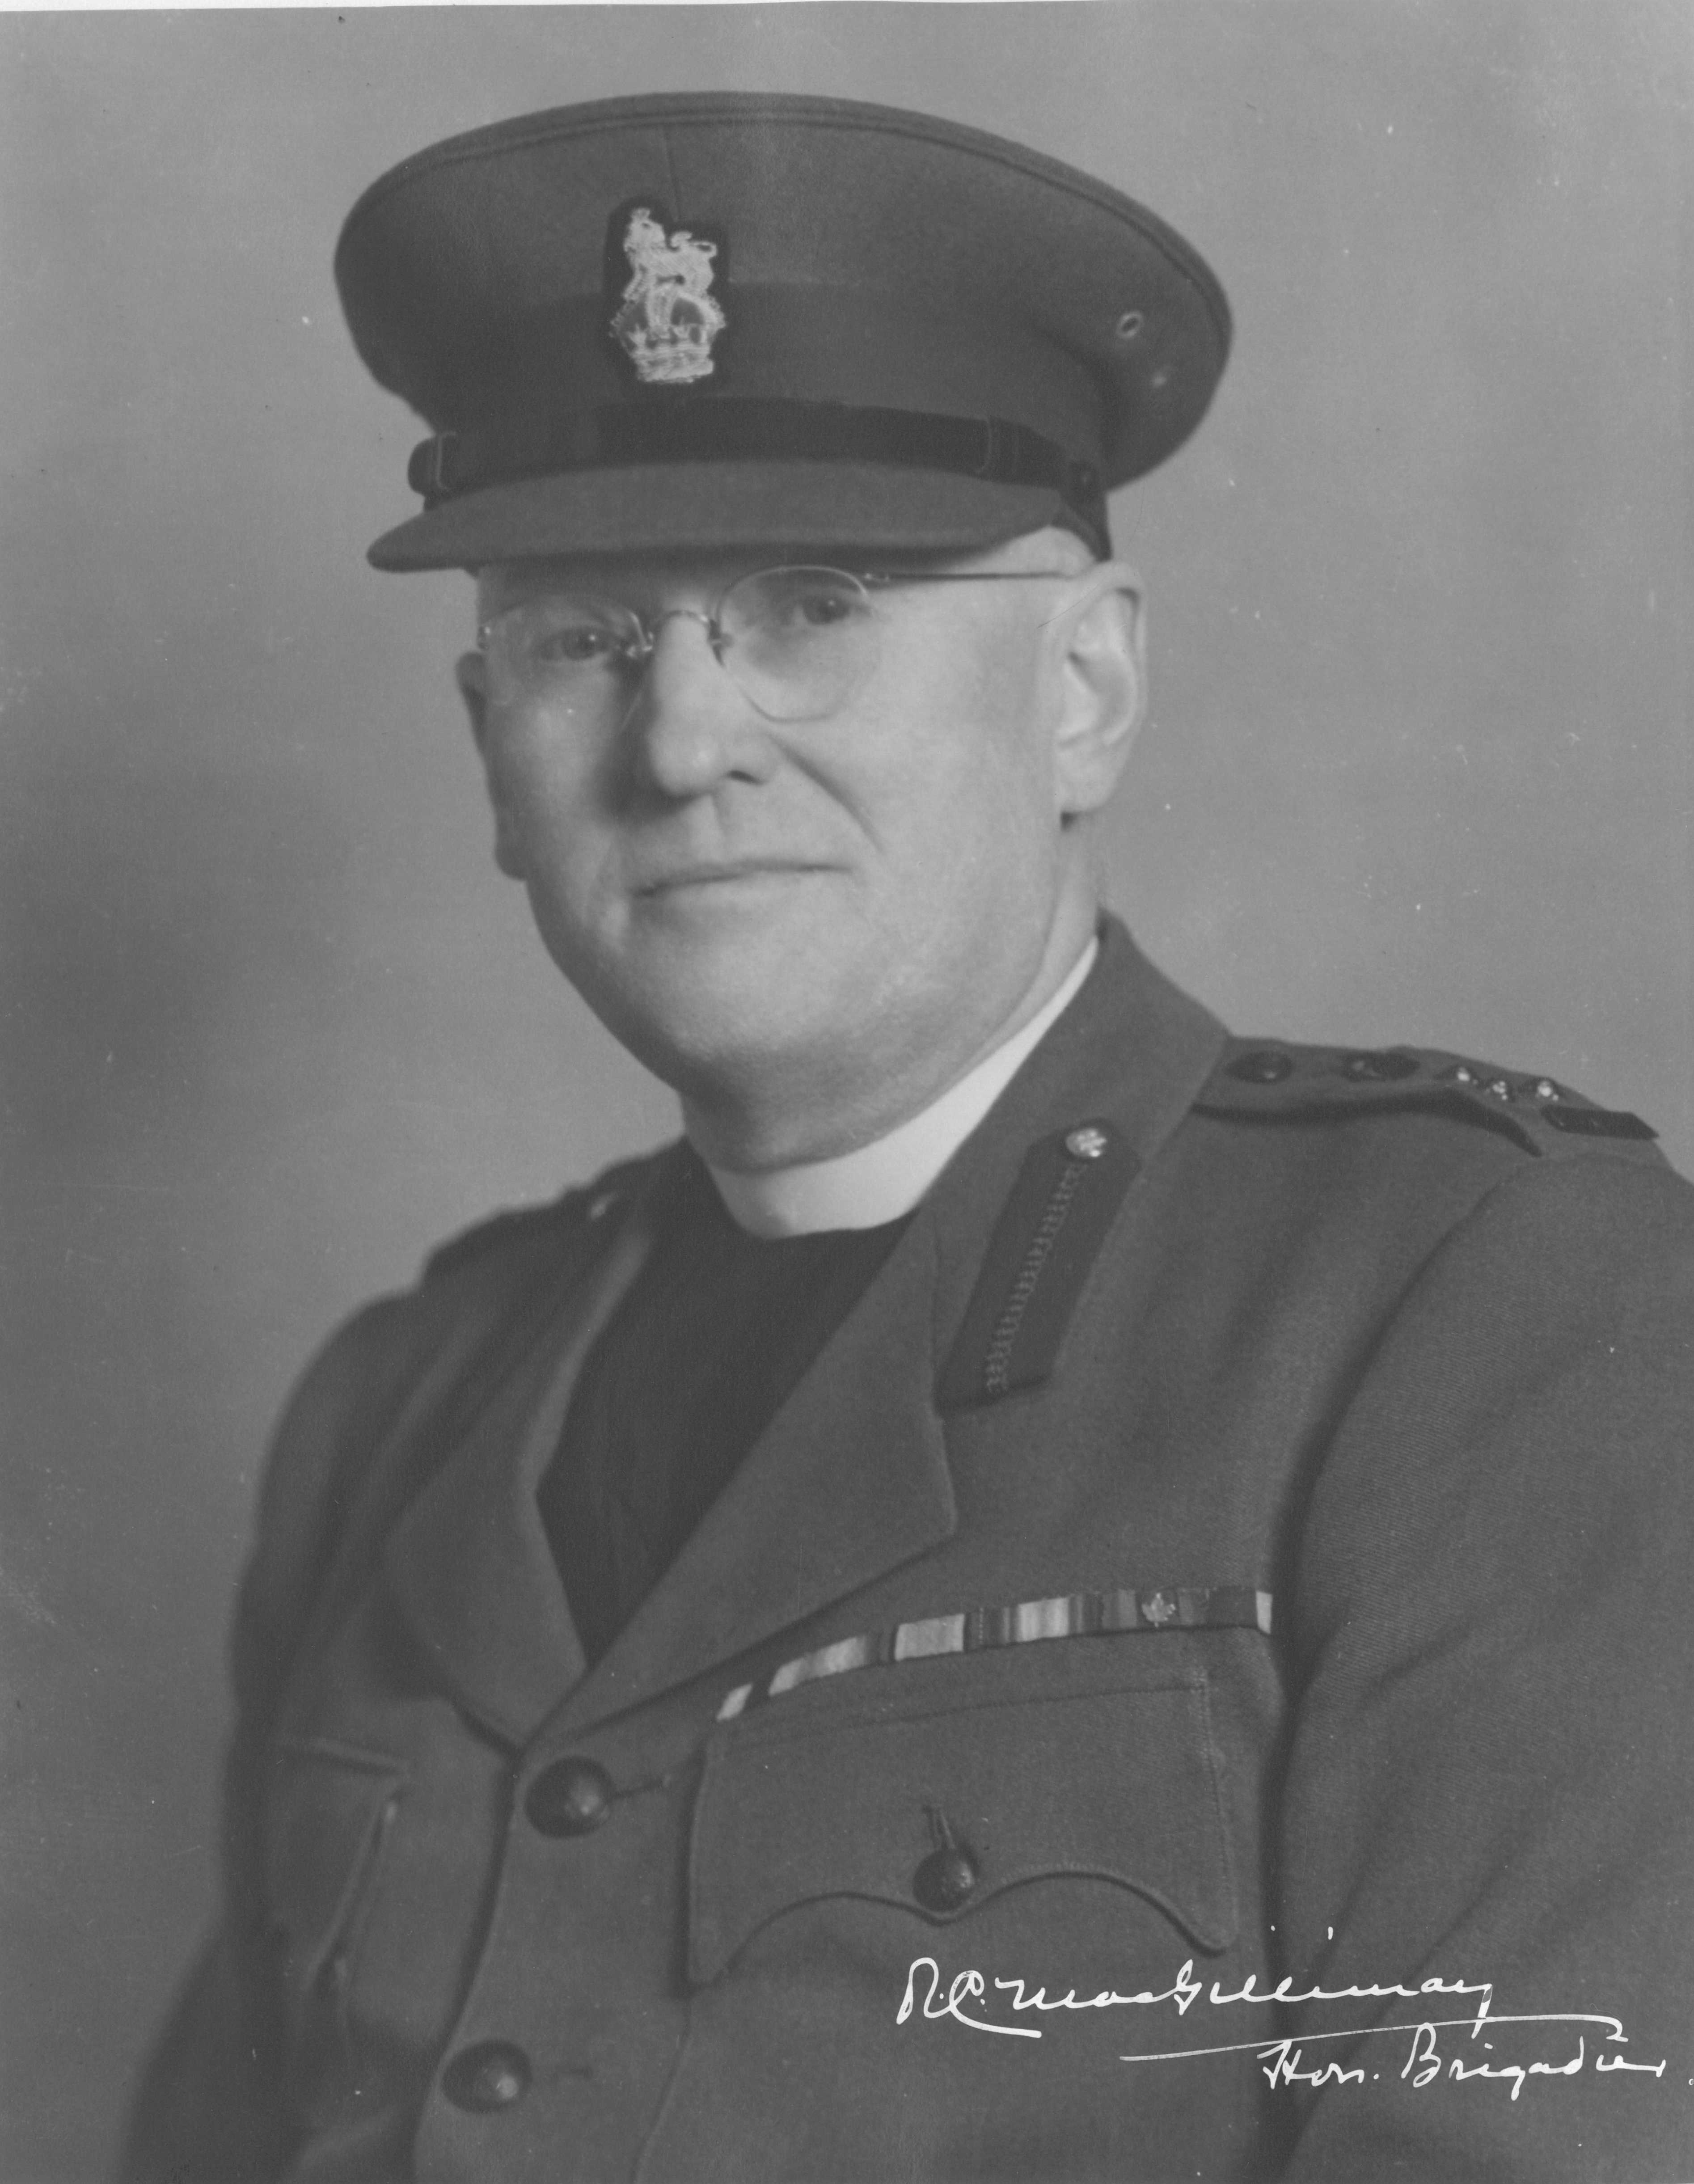 Black and white portrait. MacGillivray is shown from the chest up, service decoration bars visible on his jacket. He is wearing a military uniform and hat.